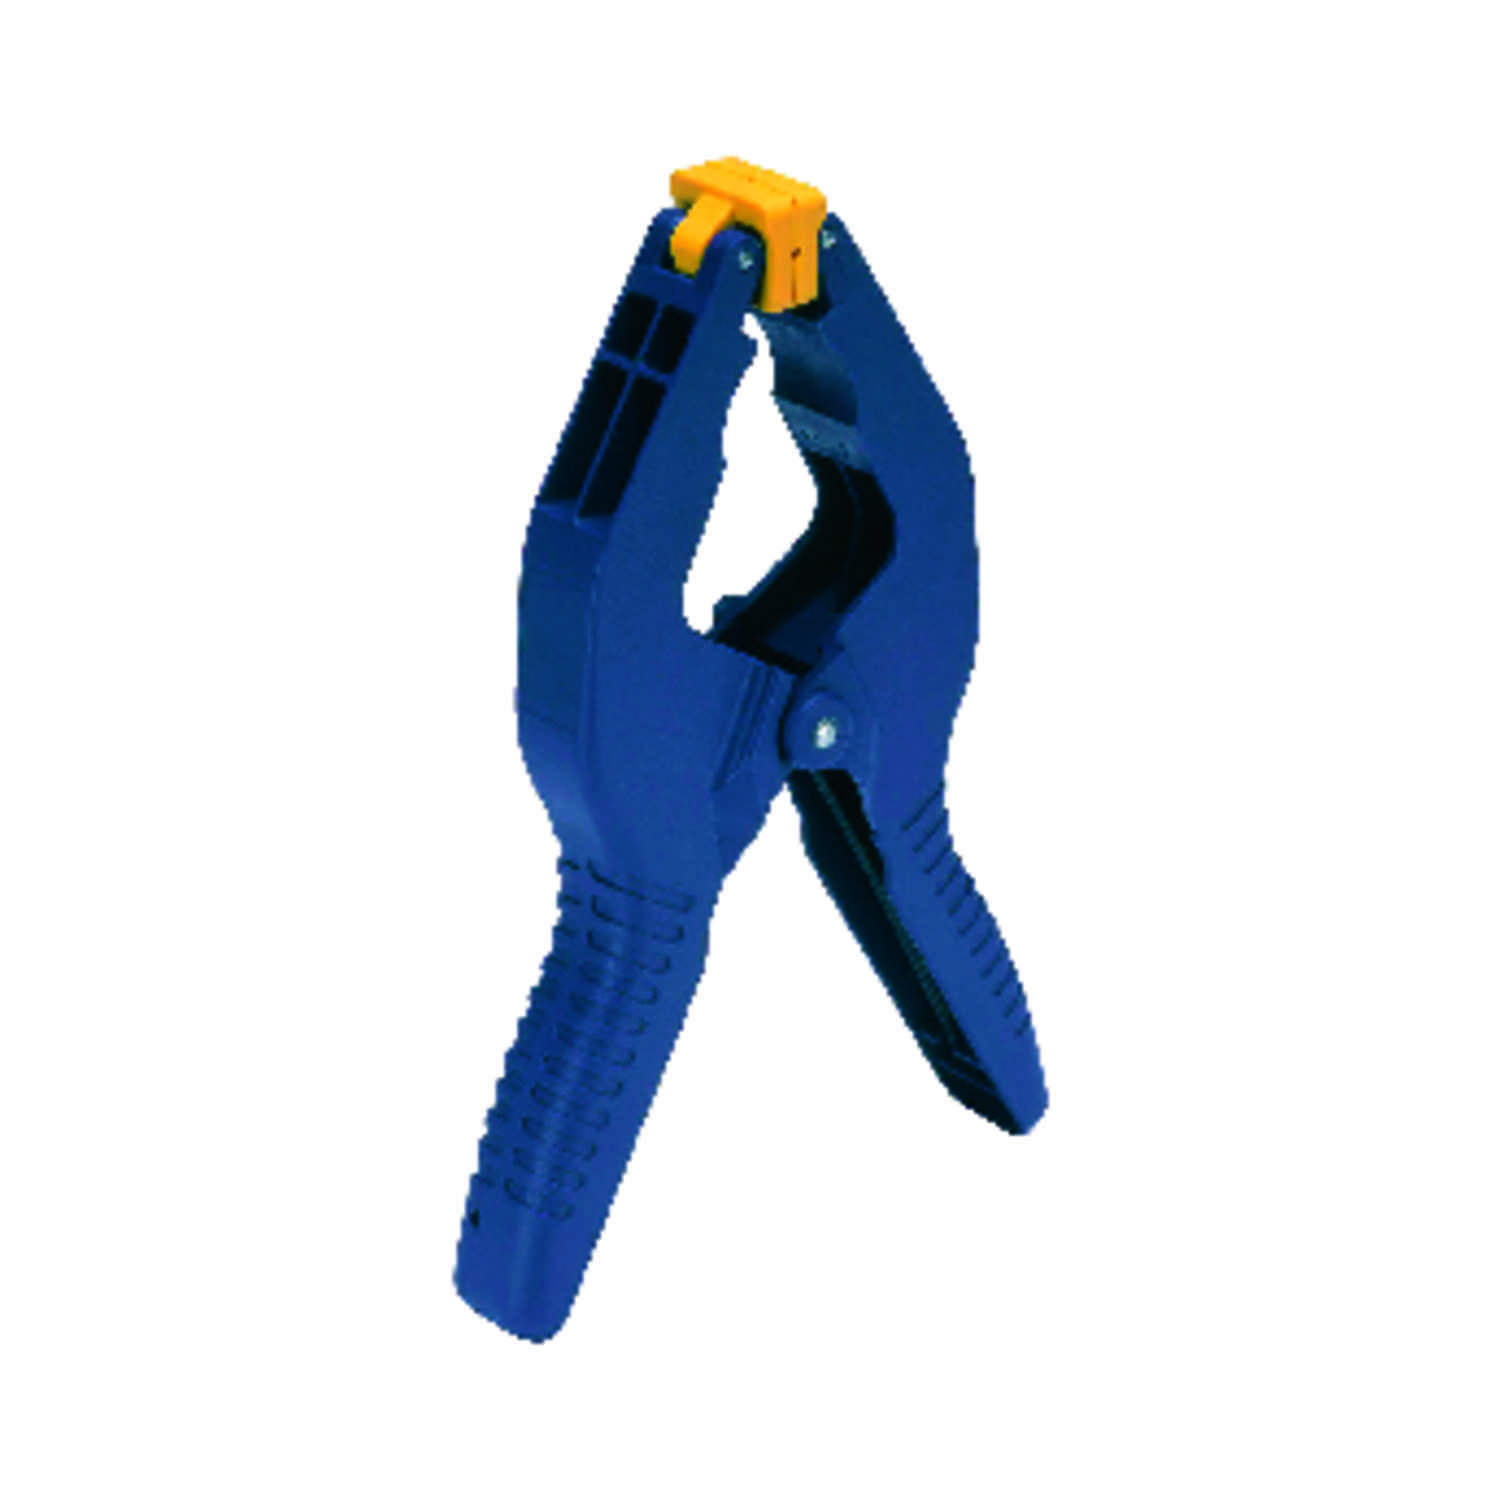 Irwin 3 in. Resin Spring Clamp 3 lb. capacity Blue Ace